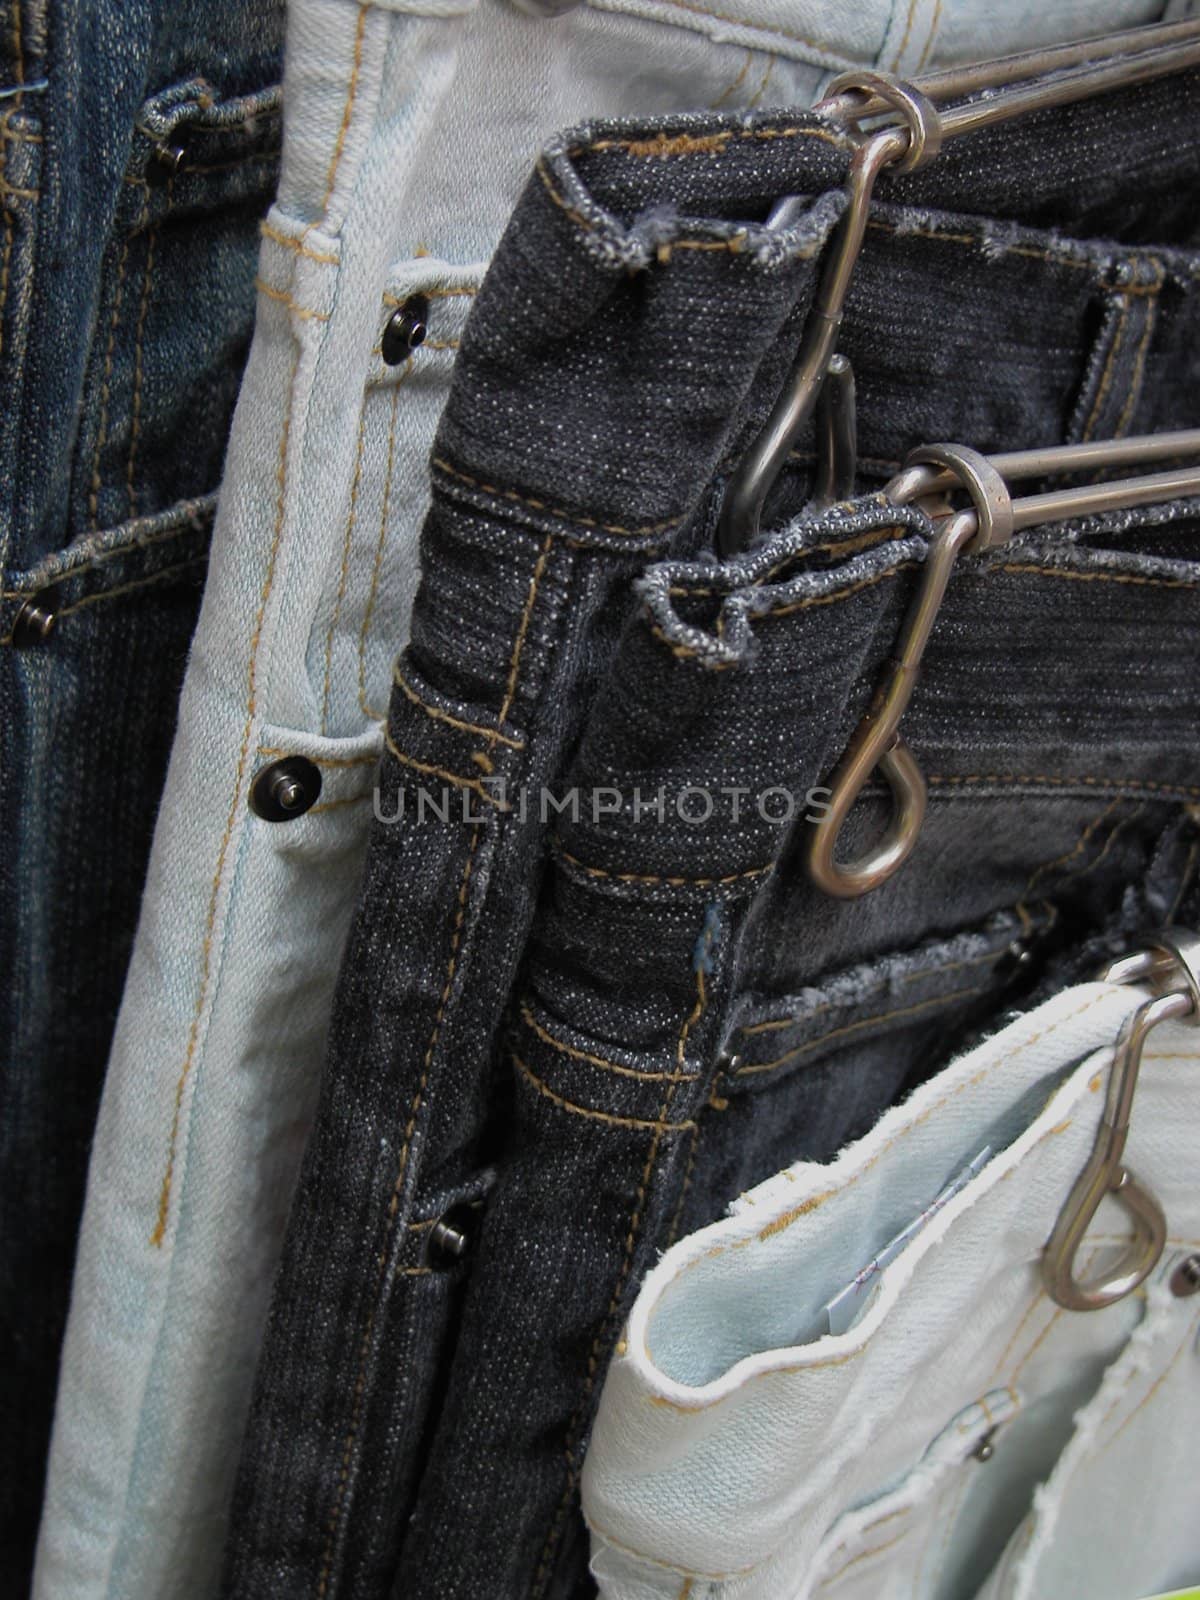 used jeans in a second hand street shop          